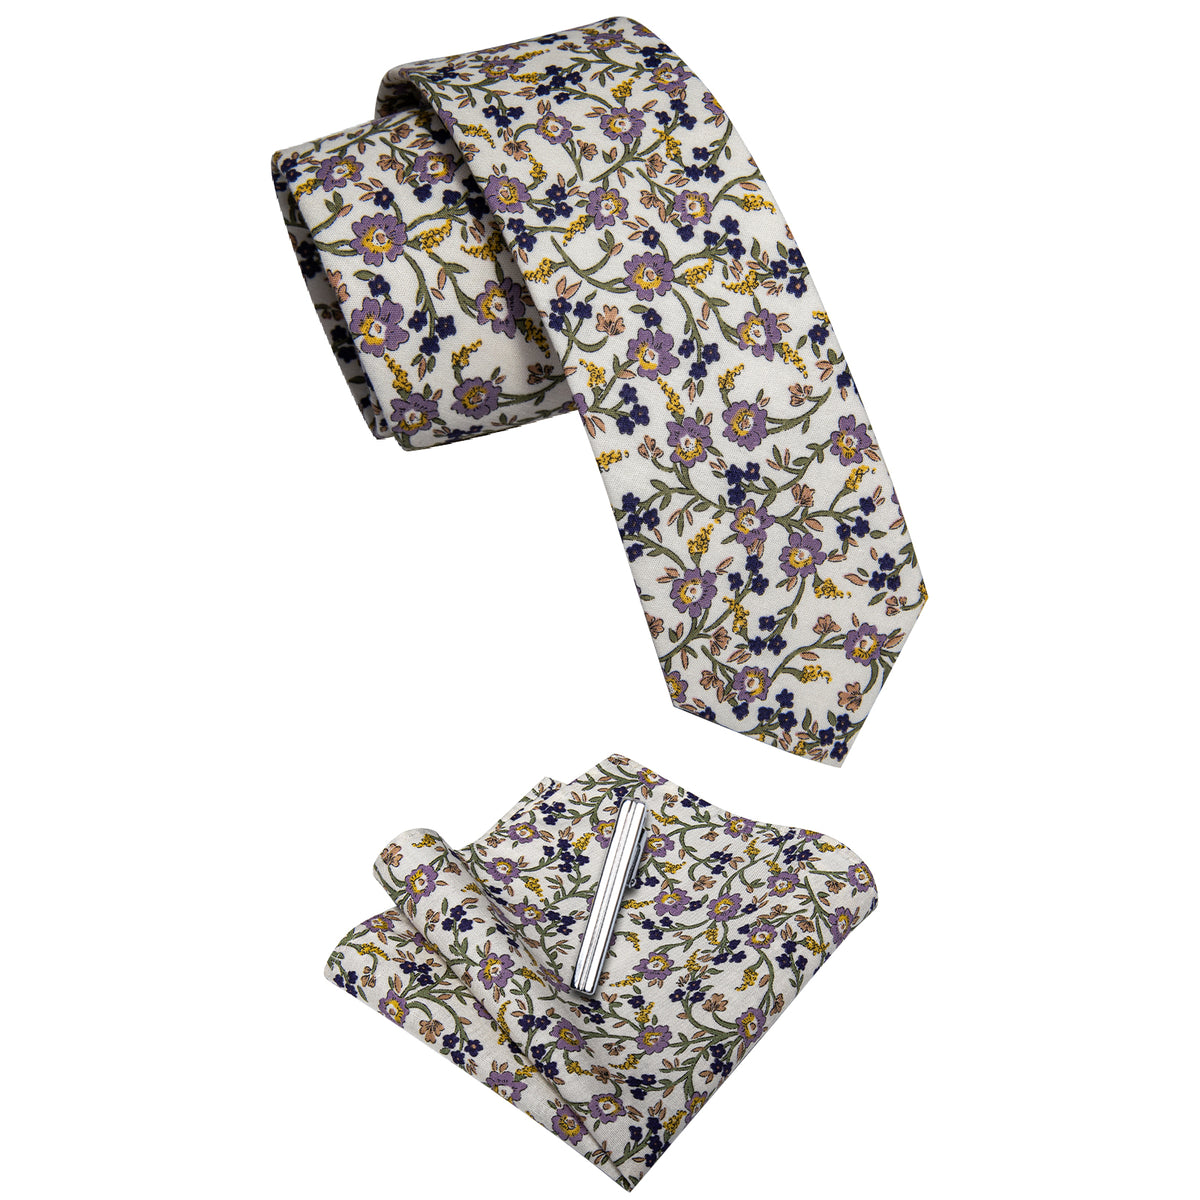 Lavender Yellow Floral Printed Skinny Tie Set with Tie Clip